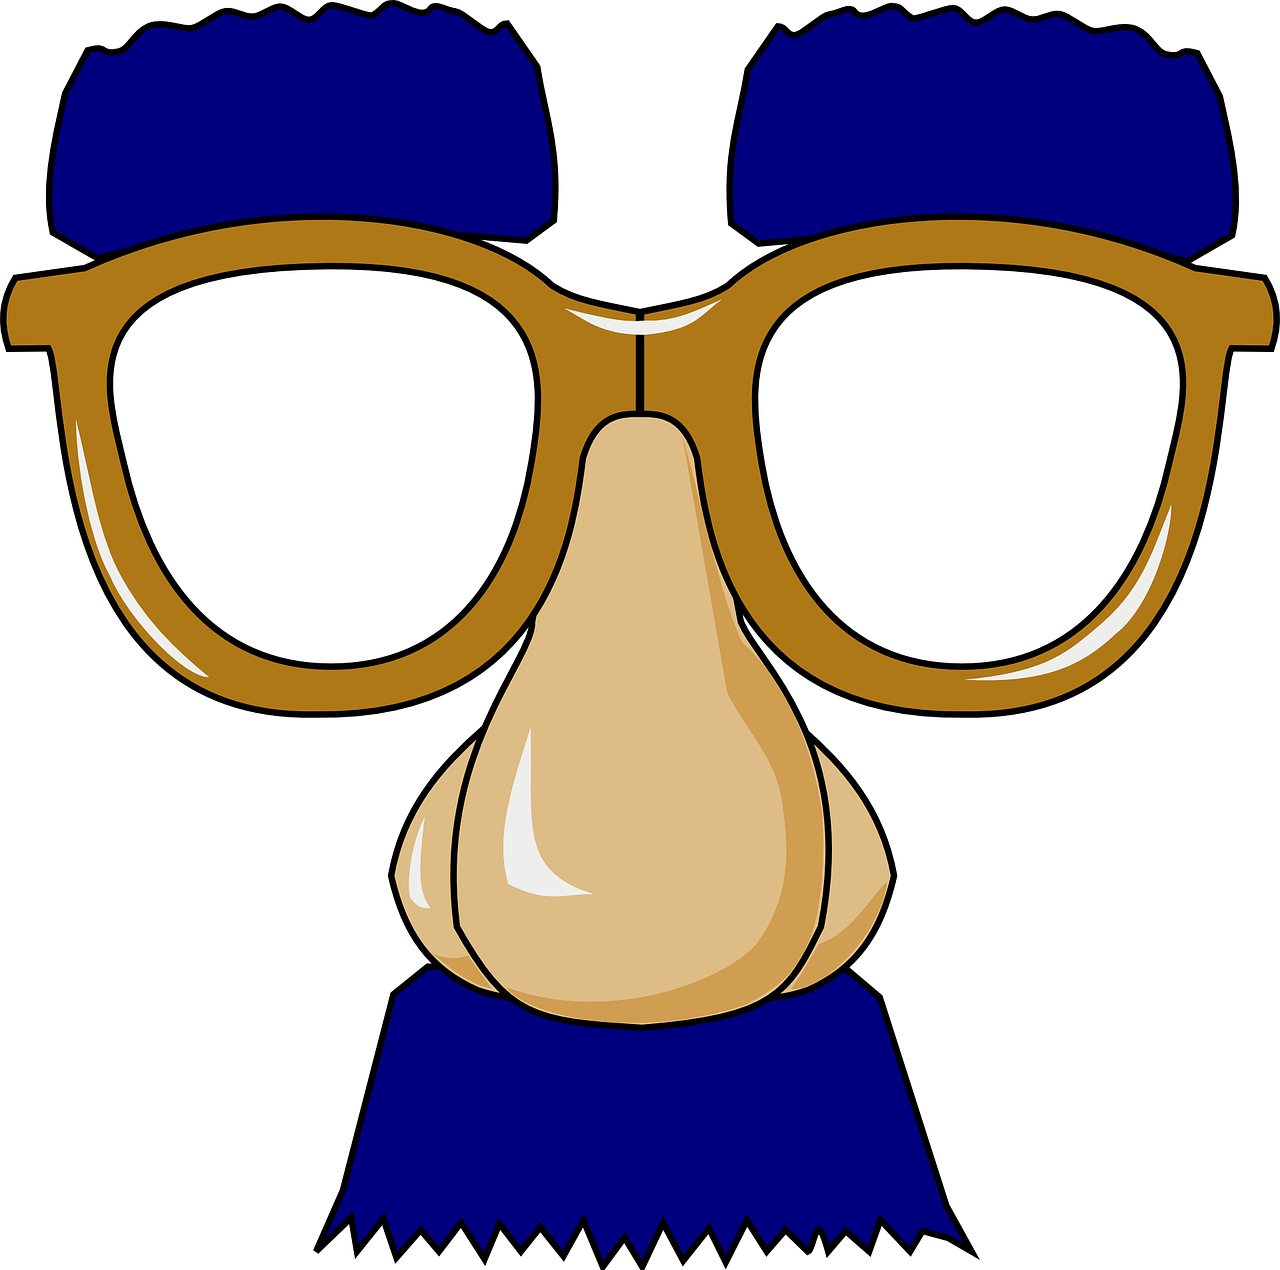 Drawing of a disguise made up of eyebrows, glasses, nose, and mustache in the style of Groucho Marx